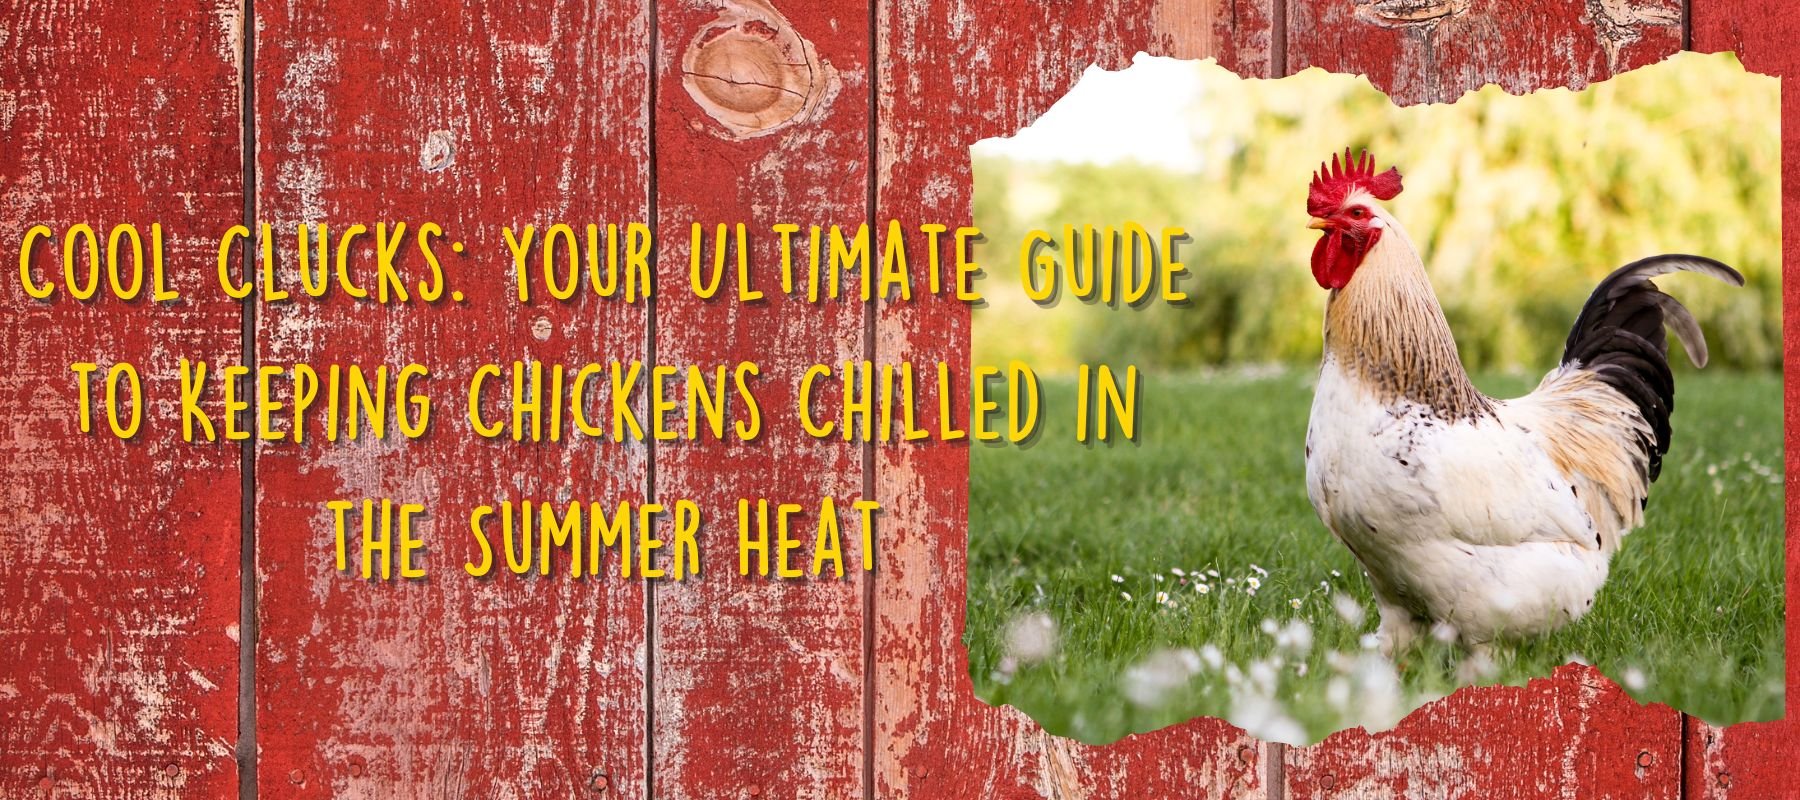 Cool Clucks: Your Ultimate Guide to Keeping Chickens Chilled in the Summer Heat - Cluck It All Farms